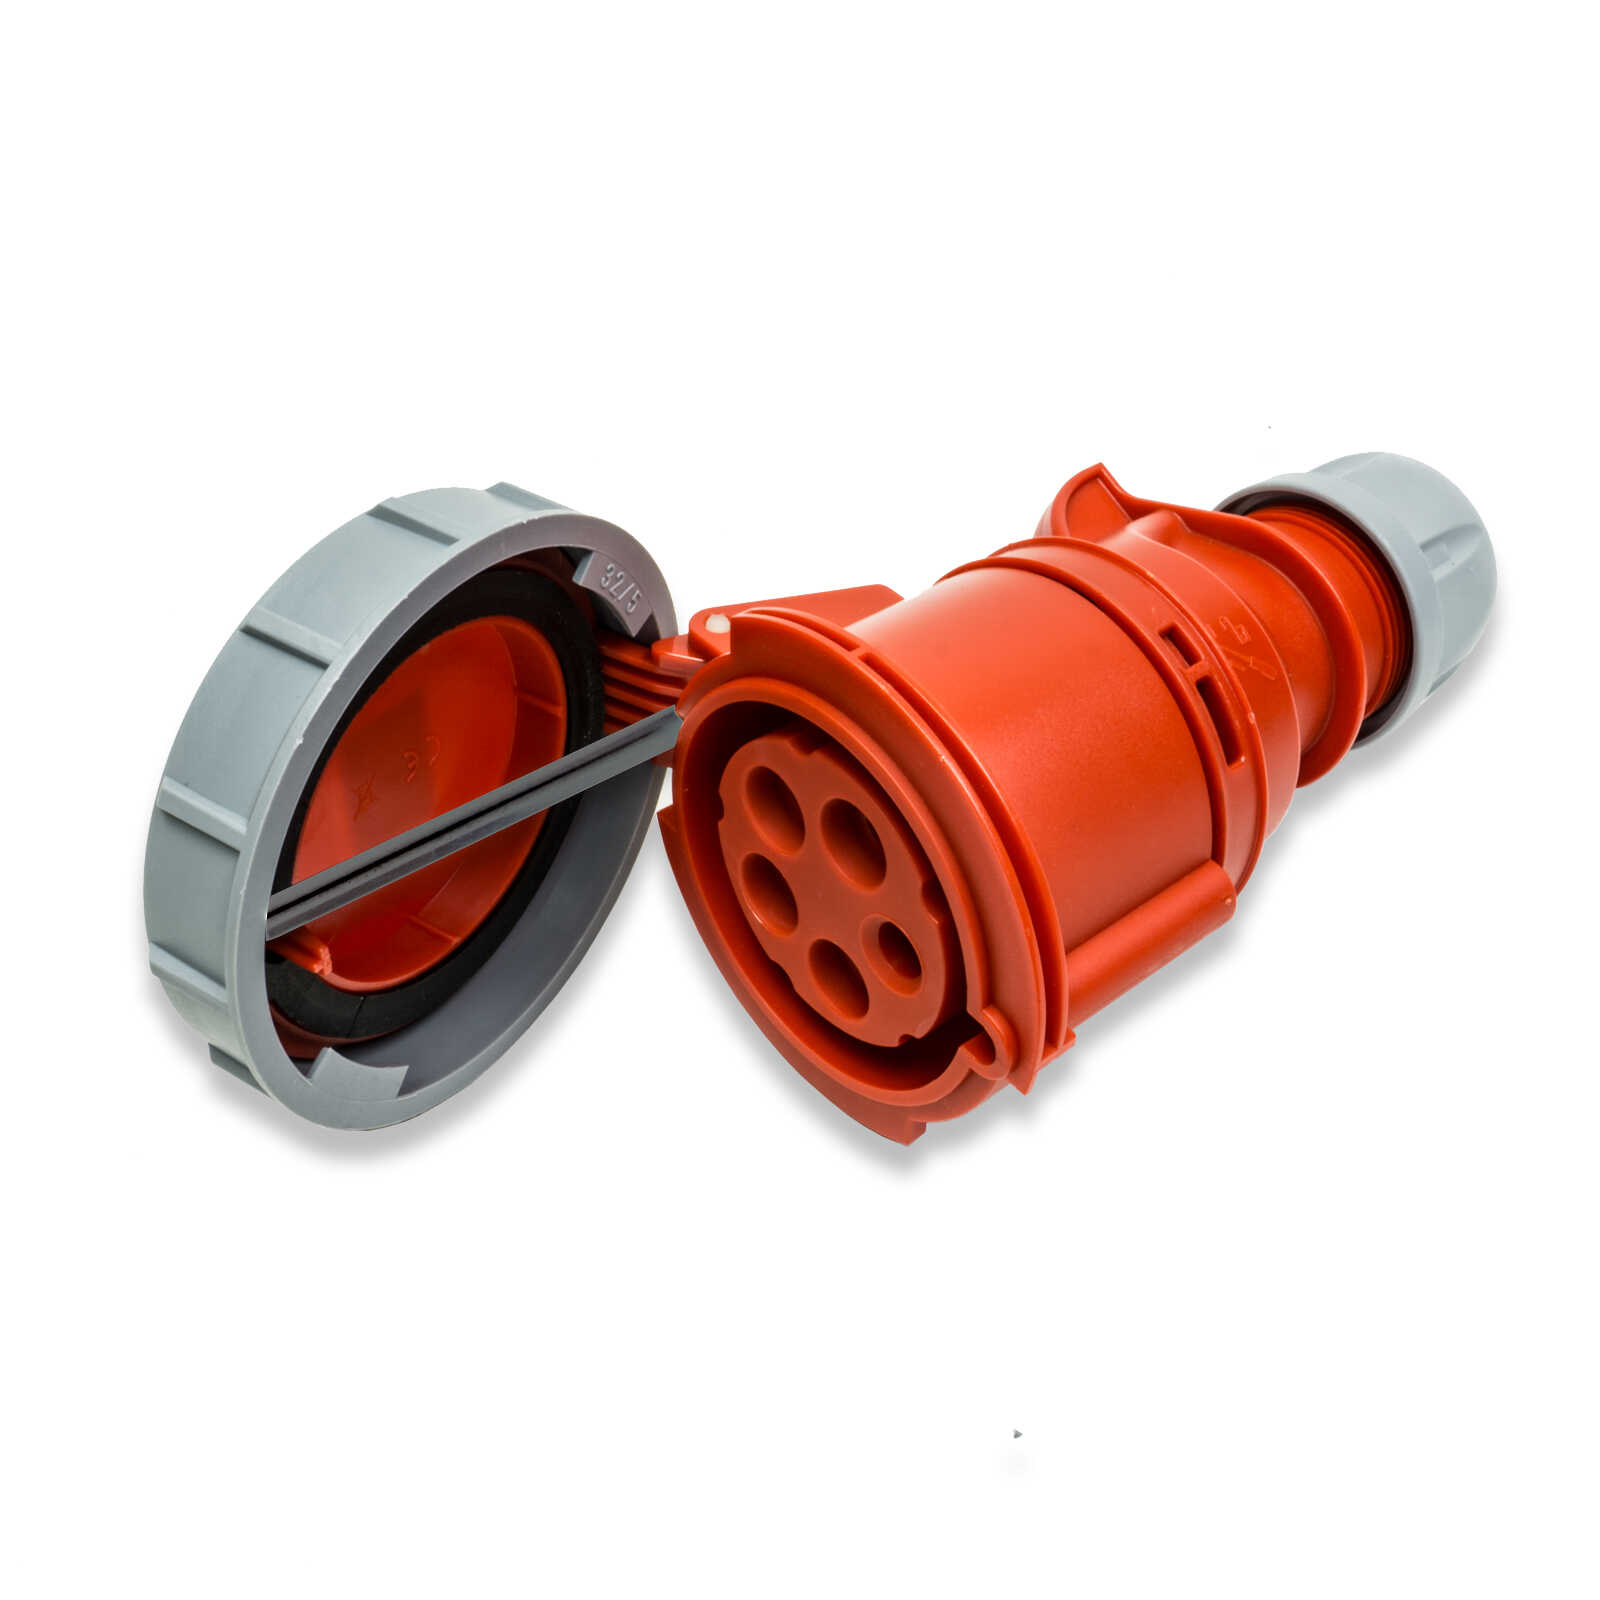 Voldt® Type 2 - 32A red commando socket, 3 phase